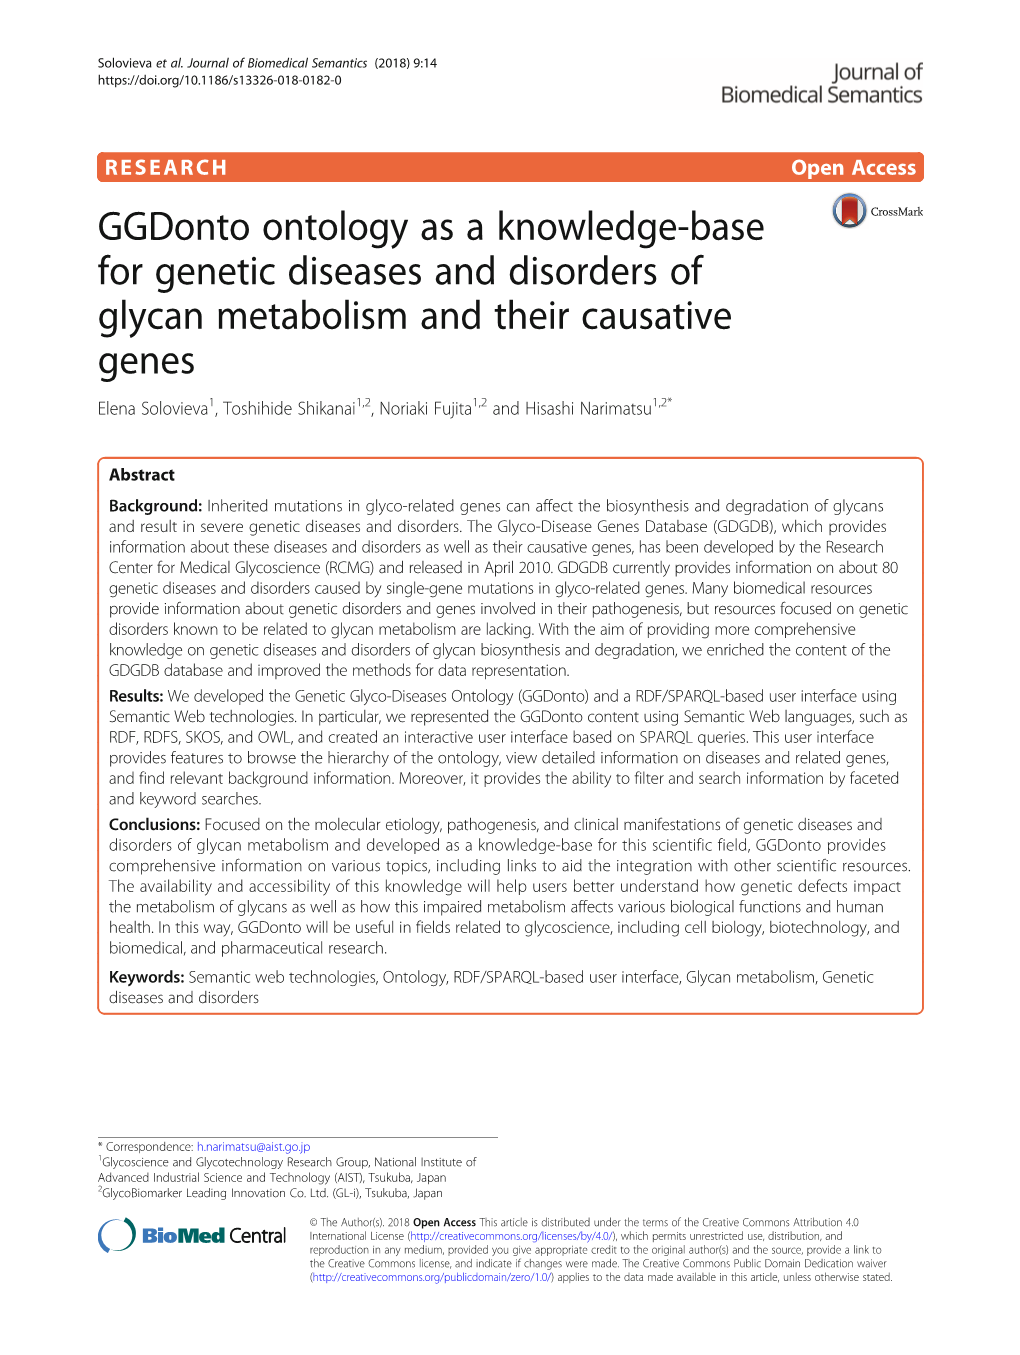 Ggdonto Ontology As a Knowledge-Base for Genetic